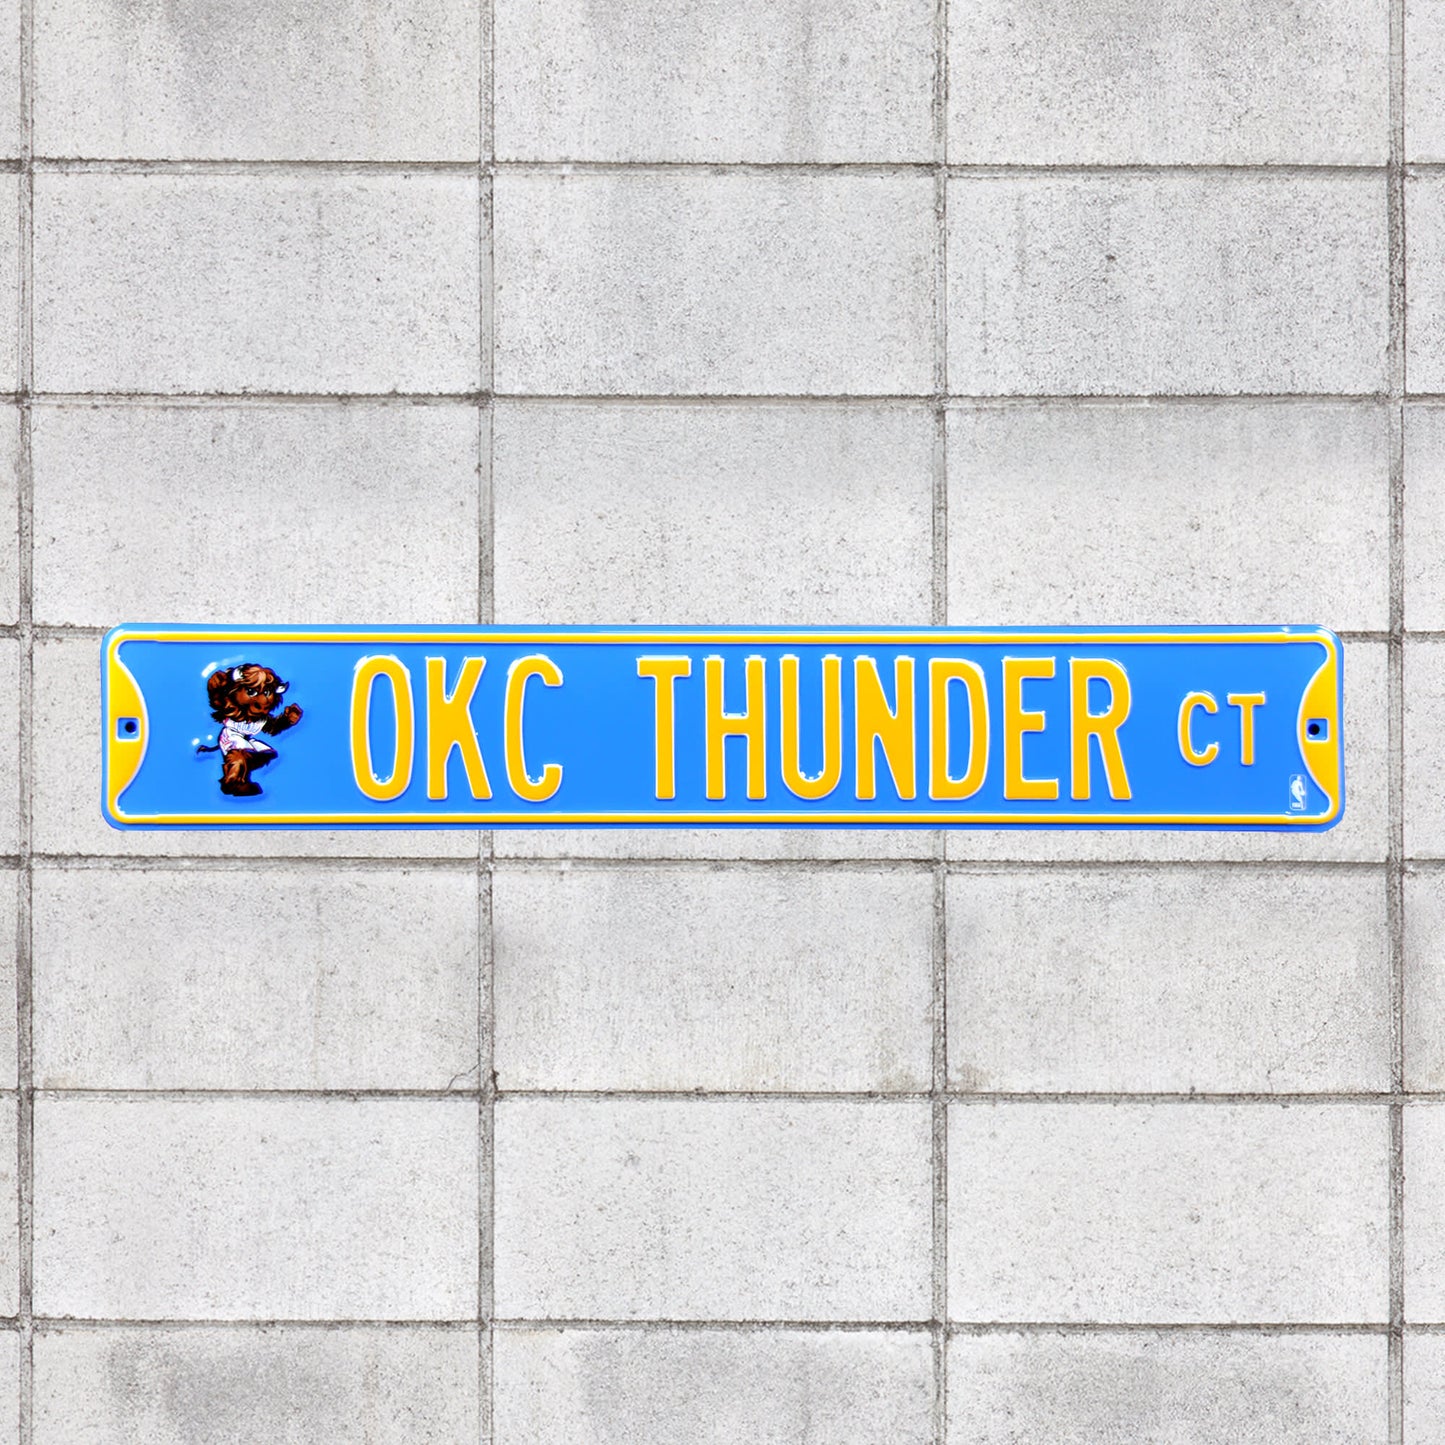 Oklahoma City Thunder: Court - Officially Licensed NBA Metal Street Sign